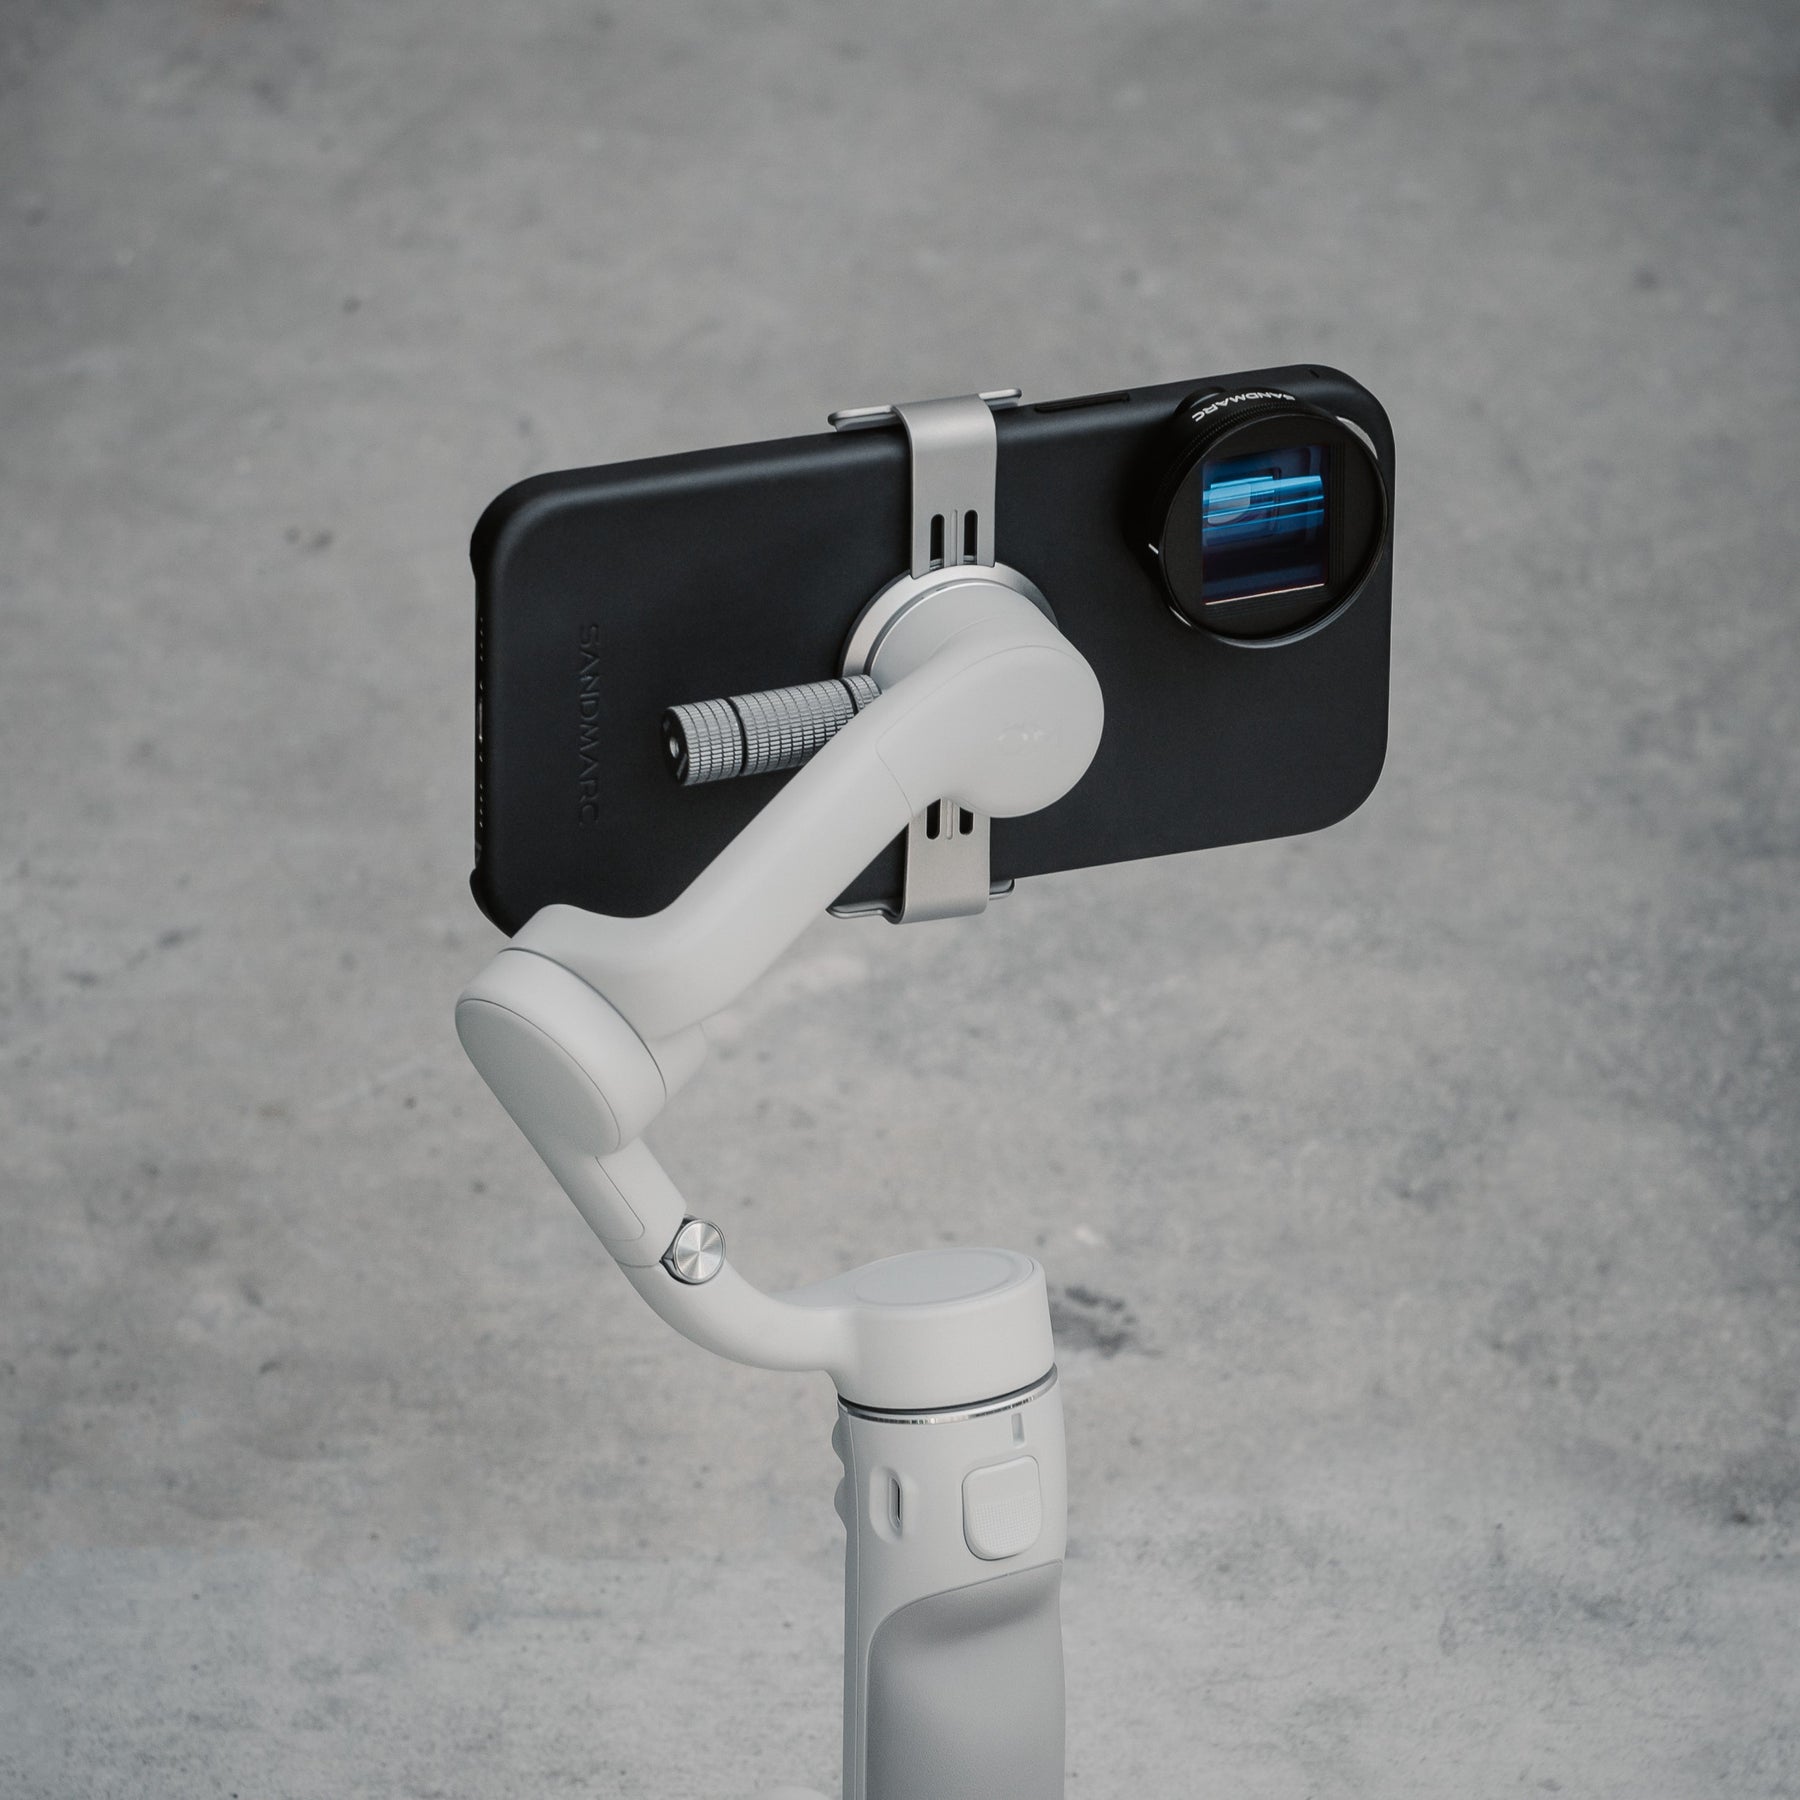 Counterweight - Osmo Mobile 6 / / OM4 Osmo